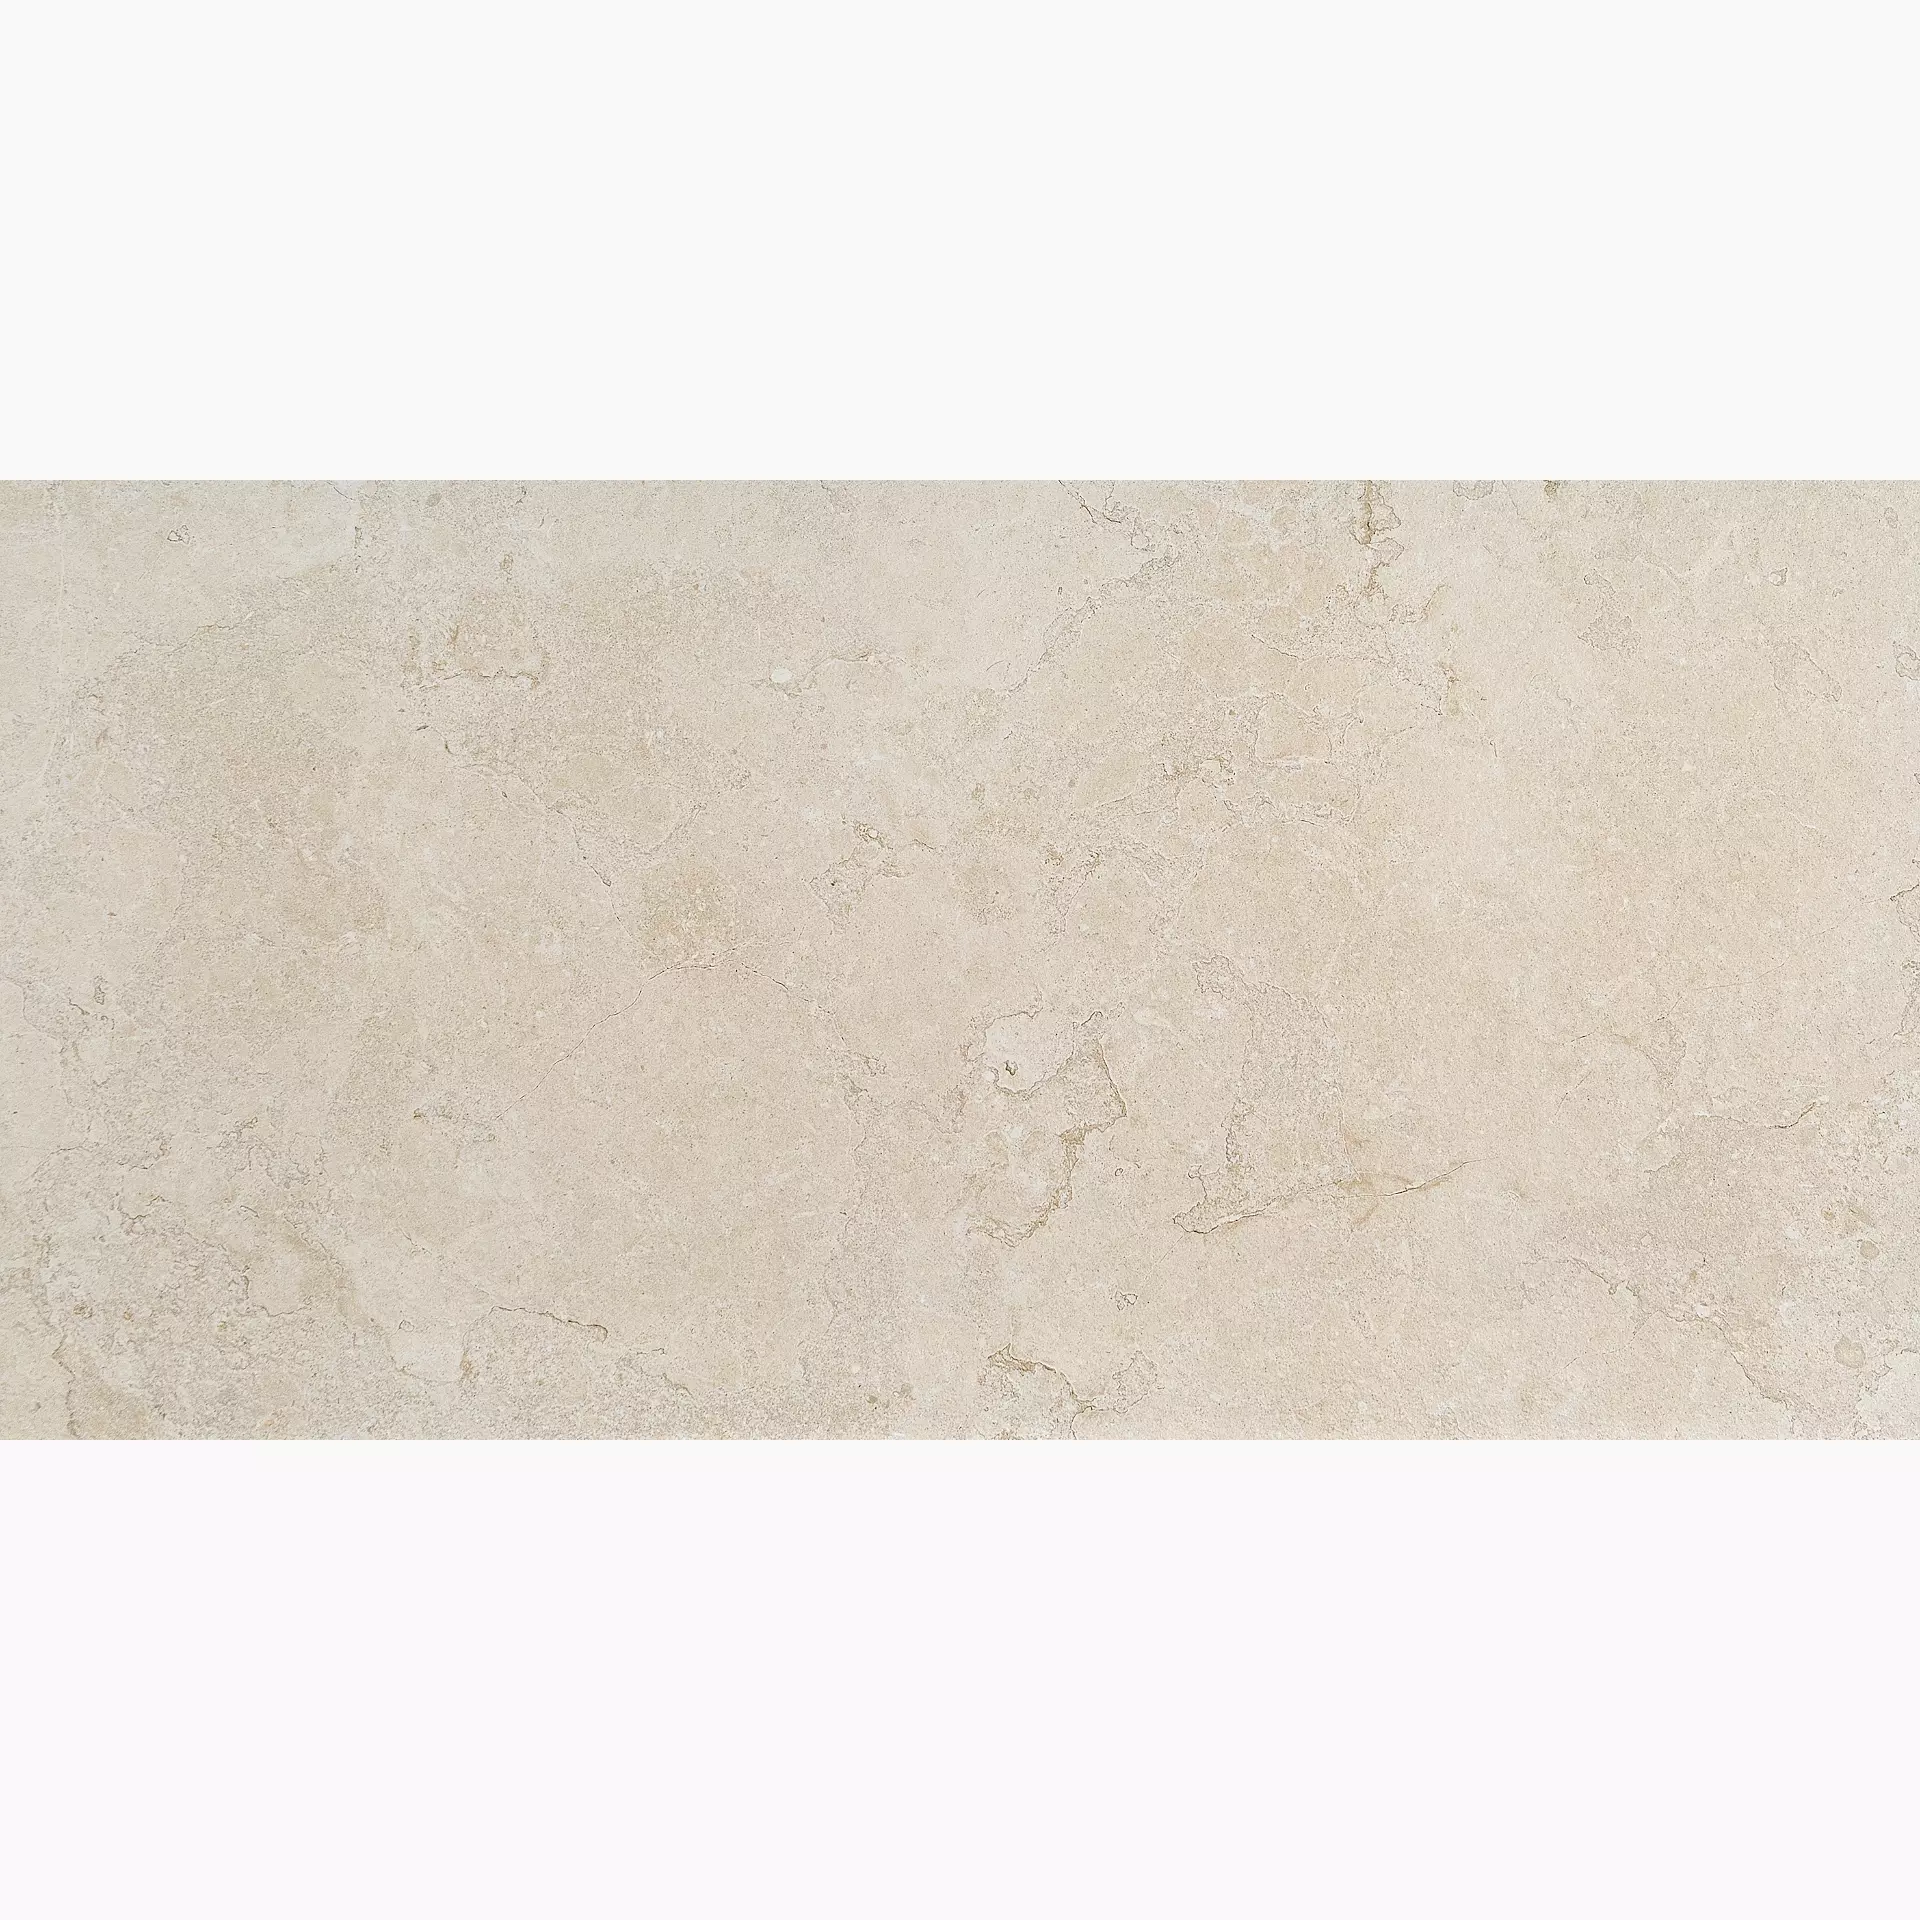 Coem Lagos Ivory Naturale 0OS361R 30x60cm rectified 9mm